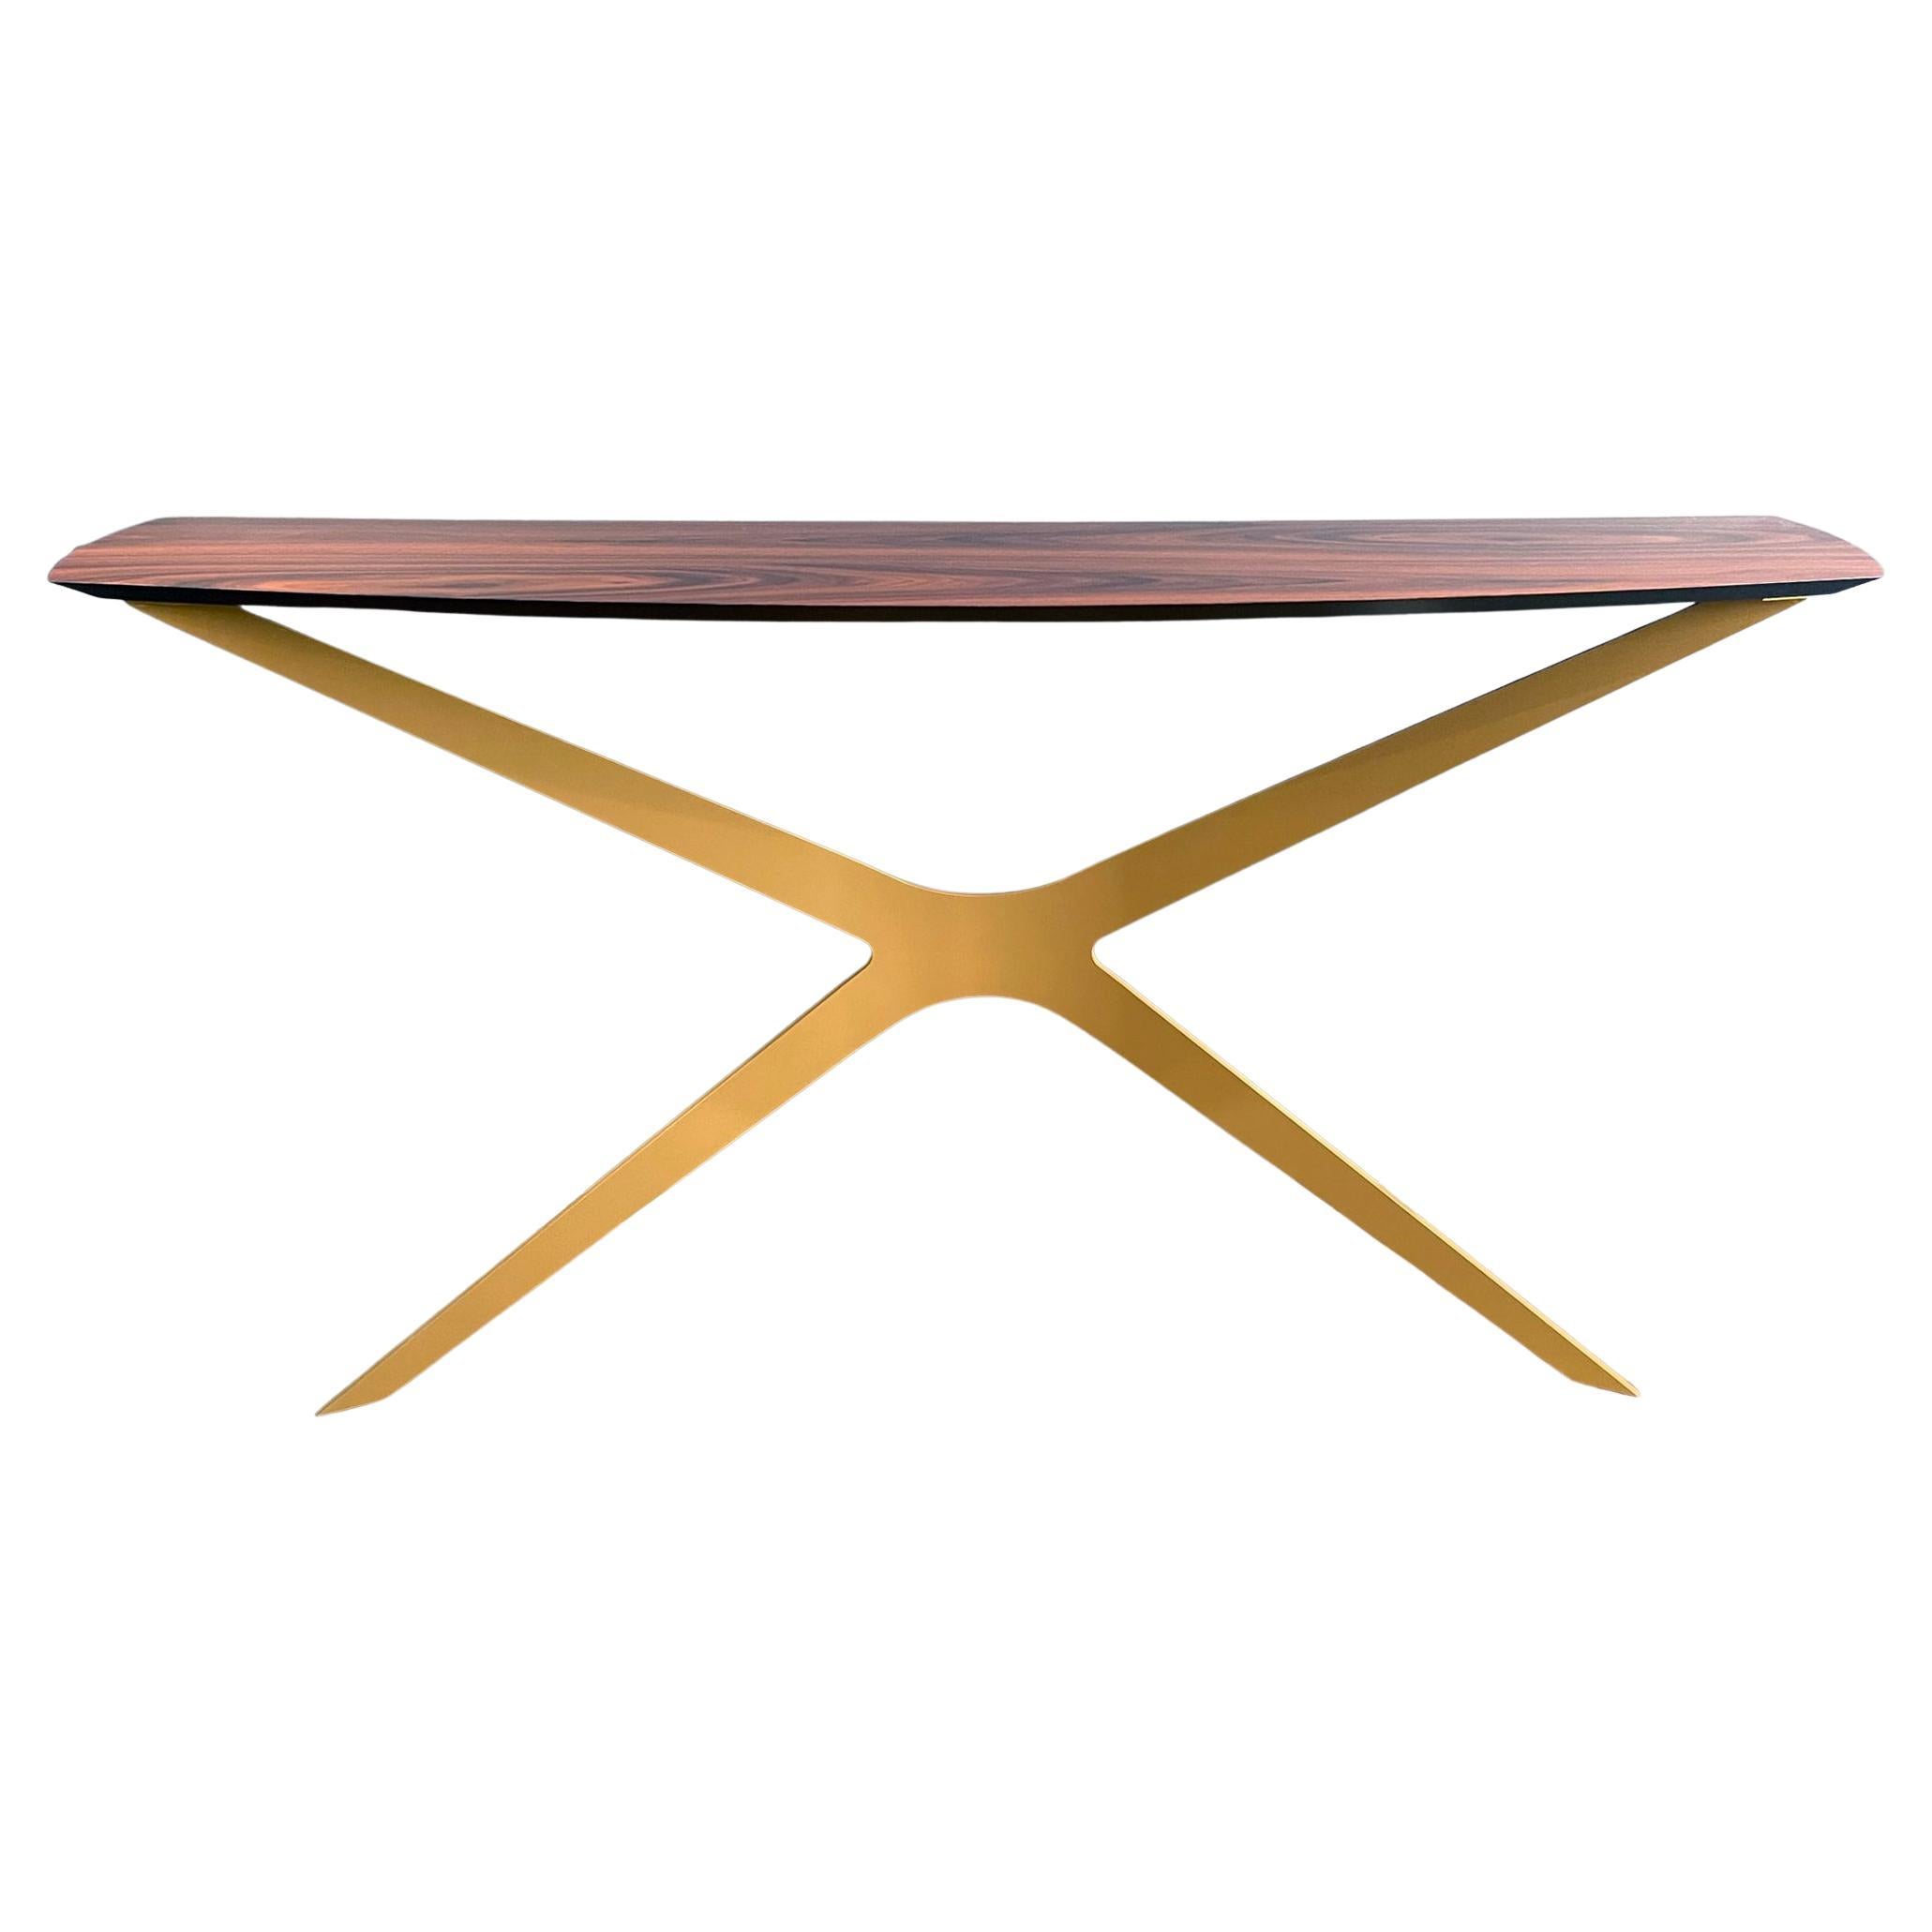 21st Century Modern Console Table in Wood and Gold Finish